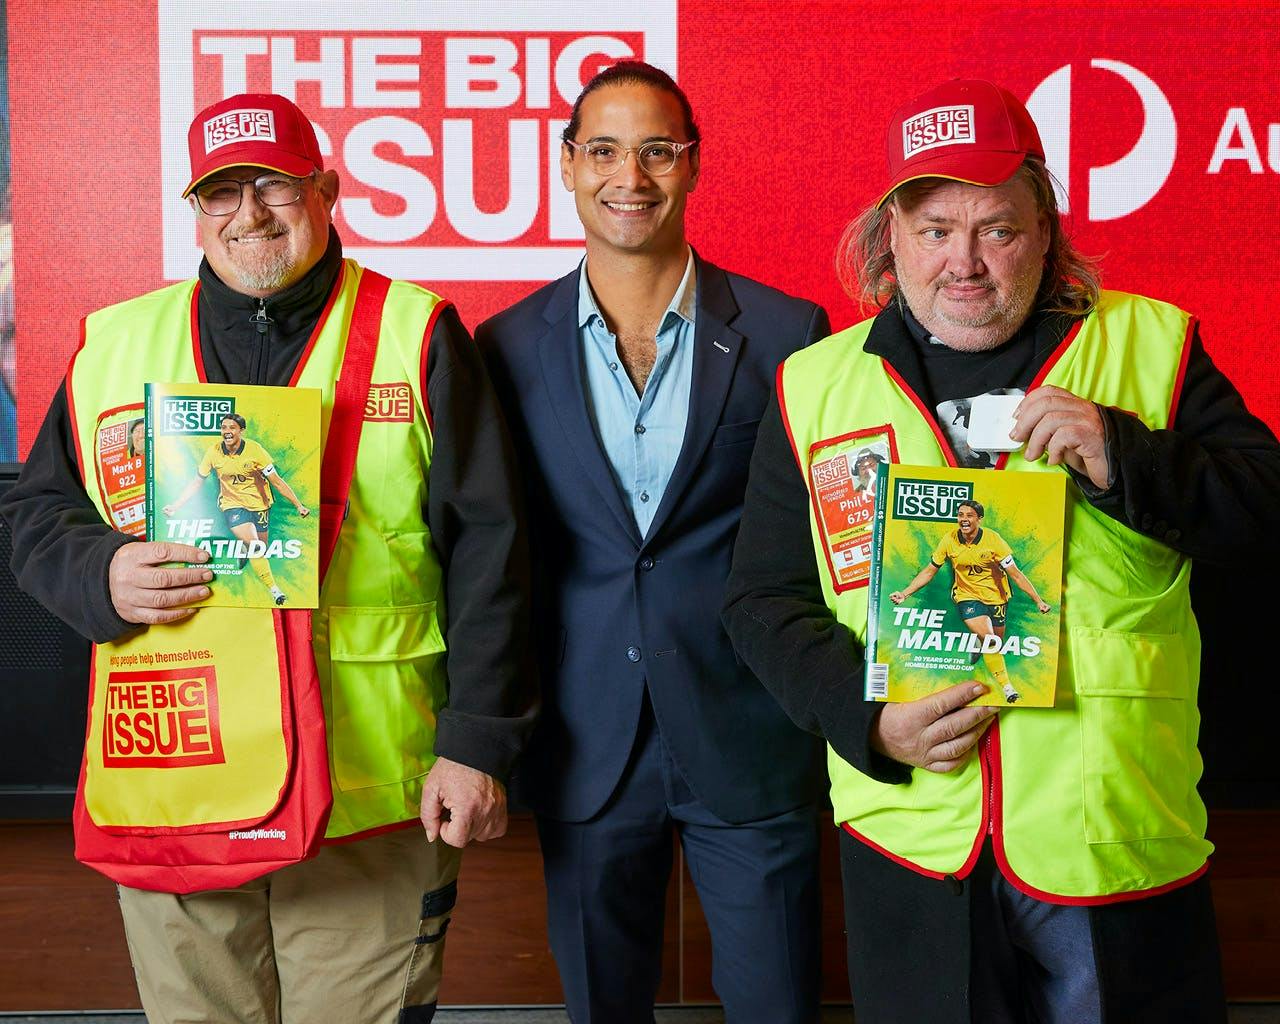 The Big Issue x WWG